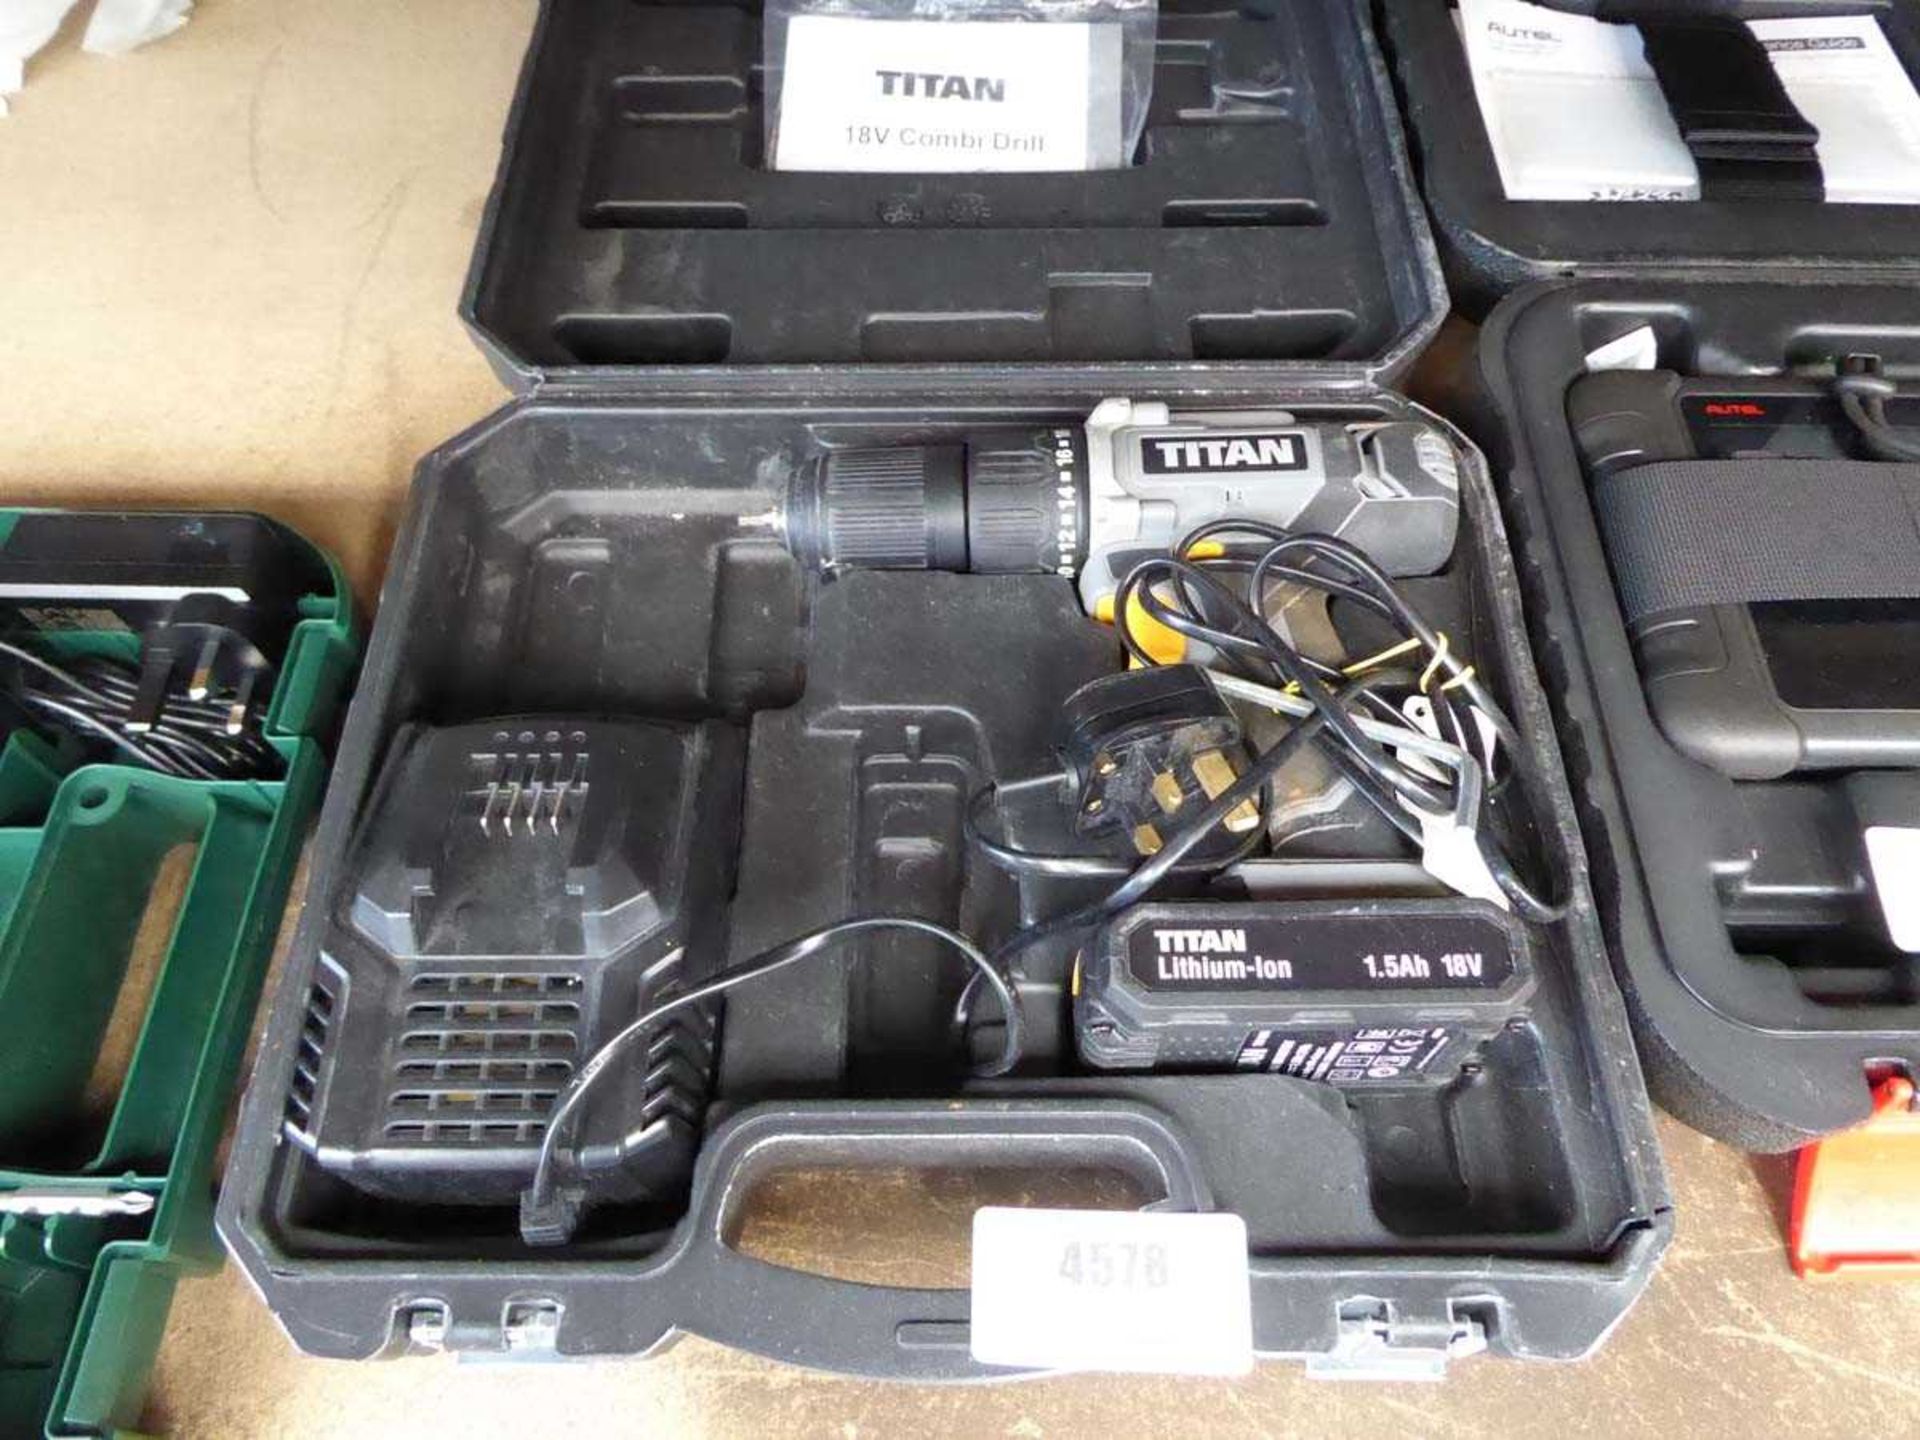 +VAT Titan battery drill with 1 battery and charger